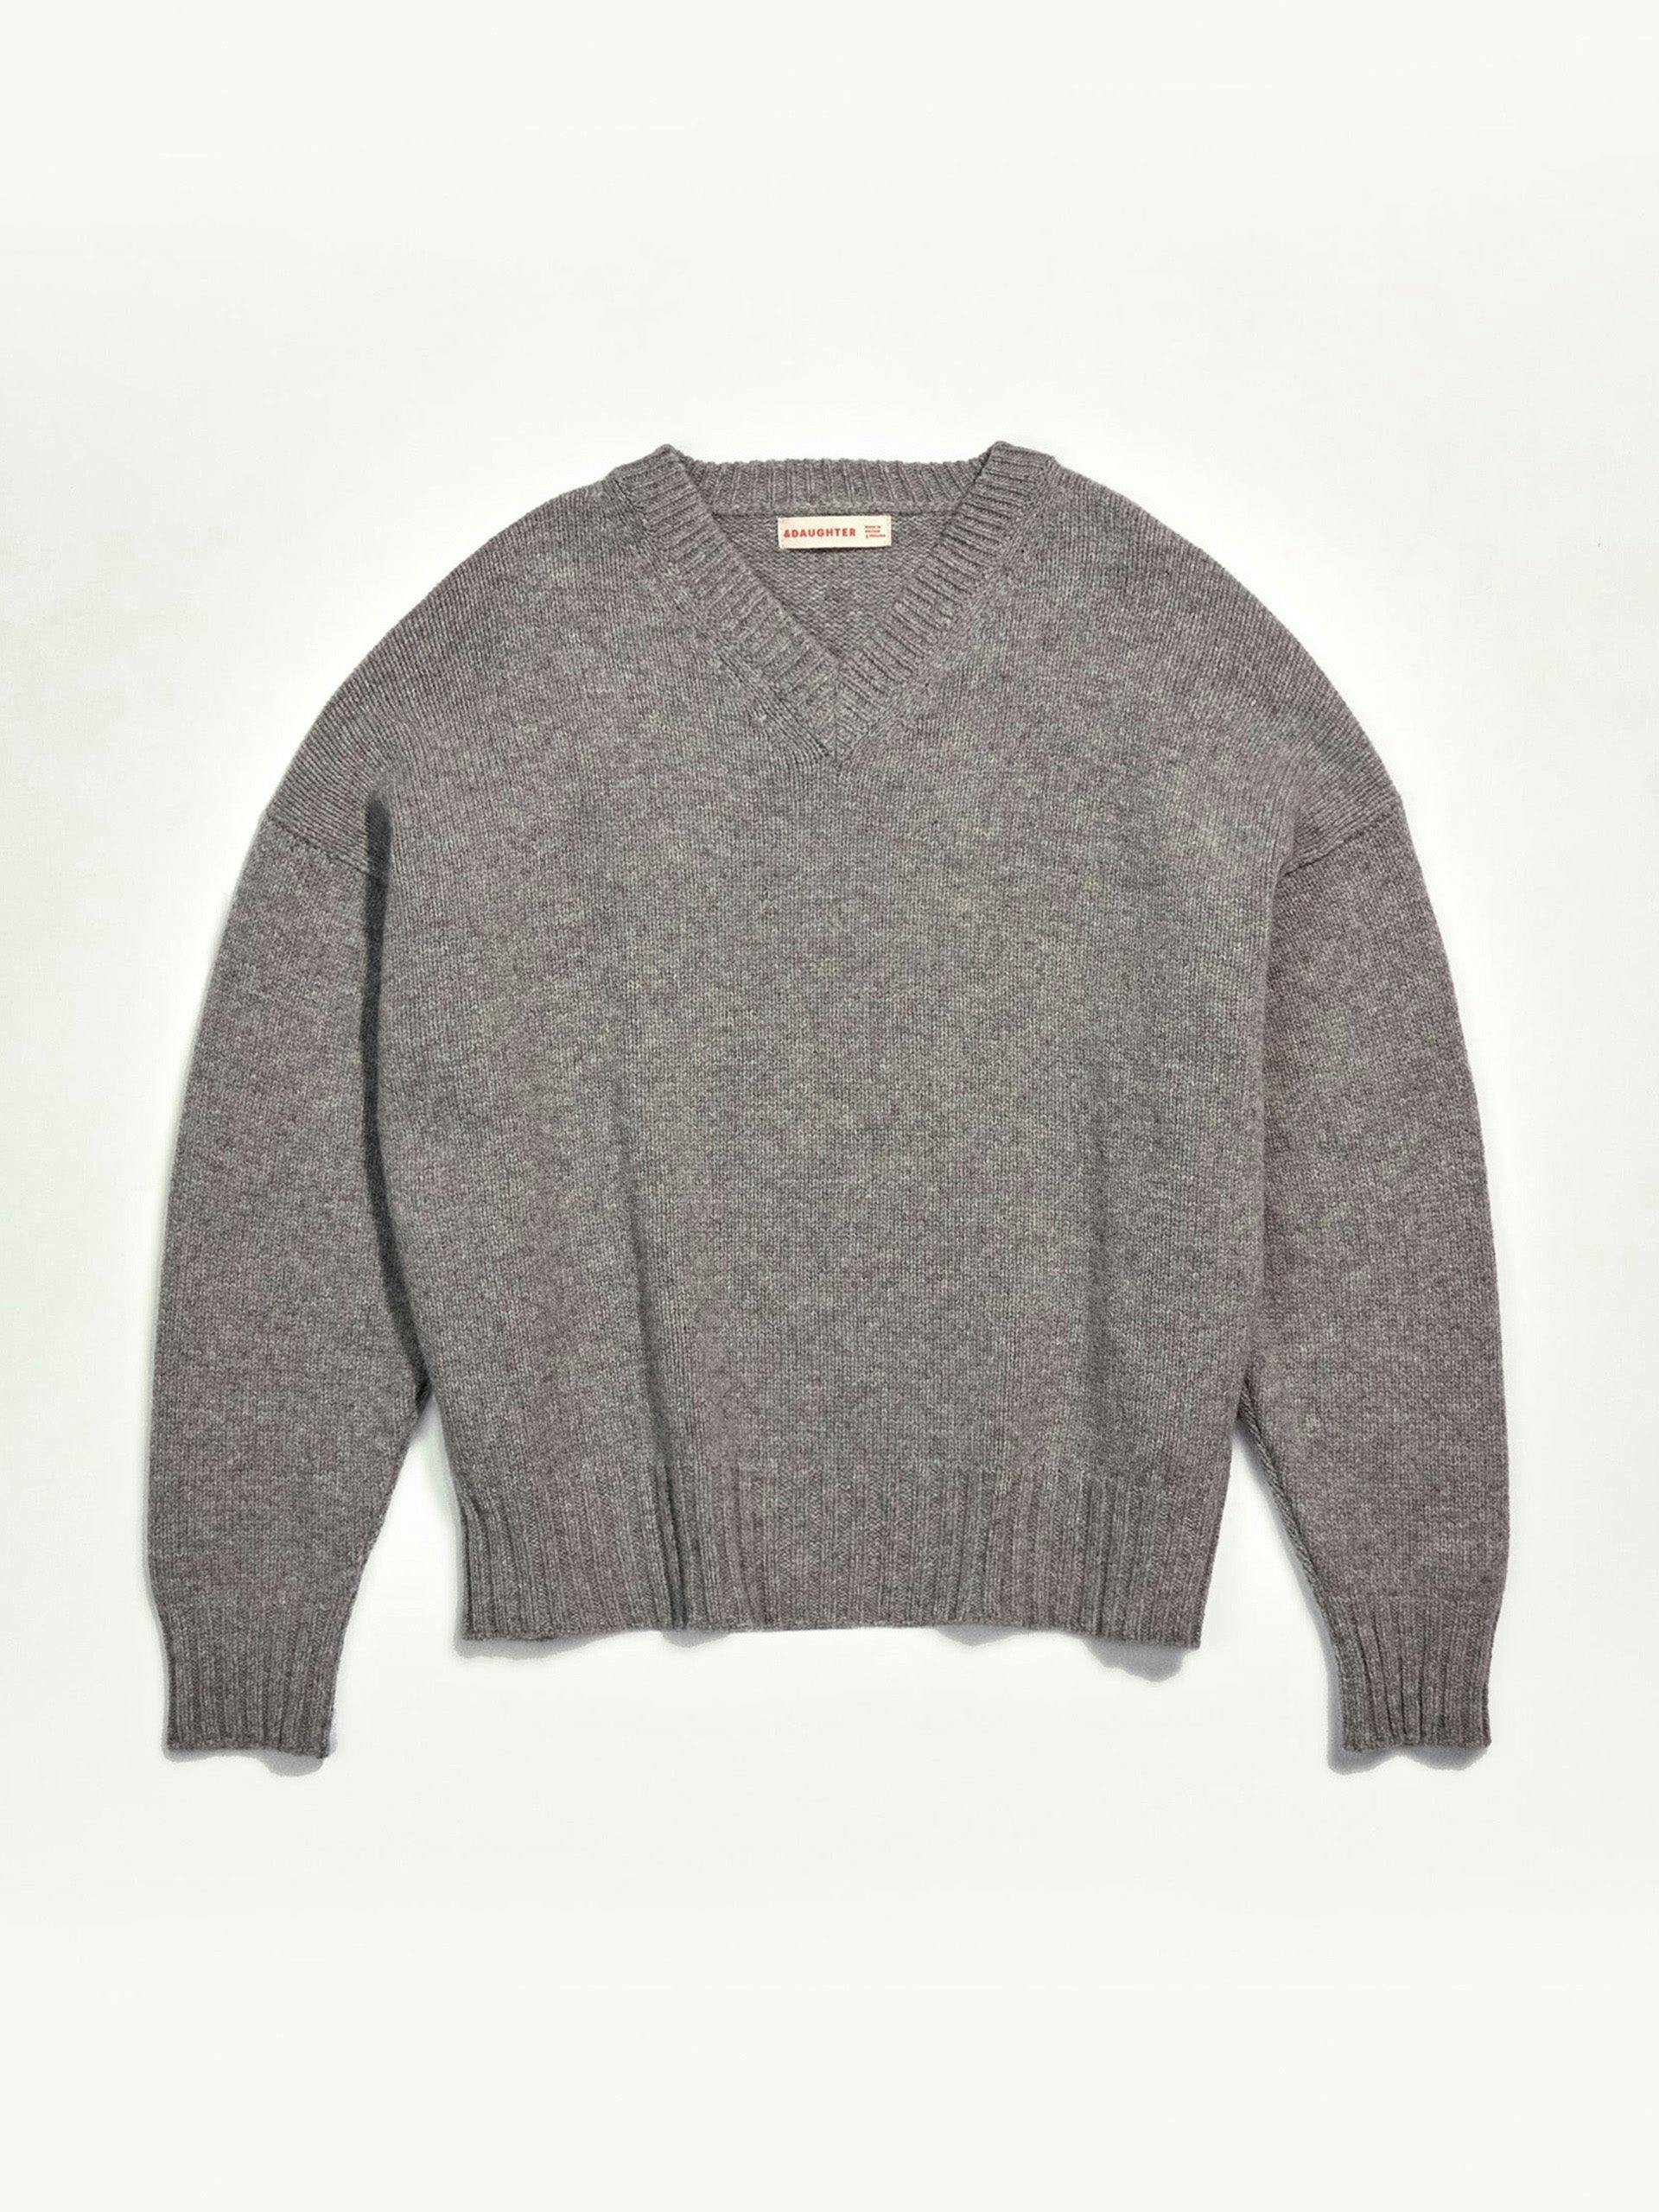 Grey Geelong slouch v-neck sweater